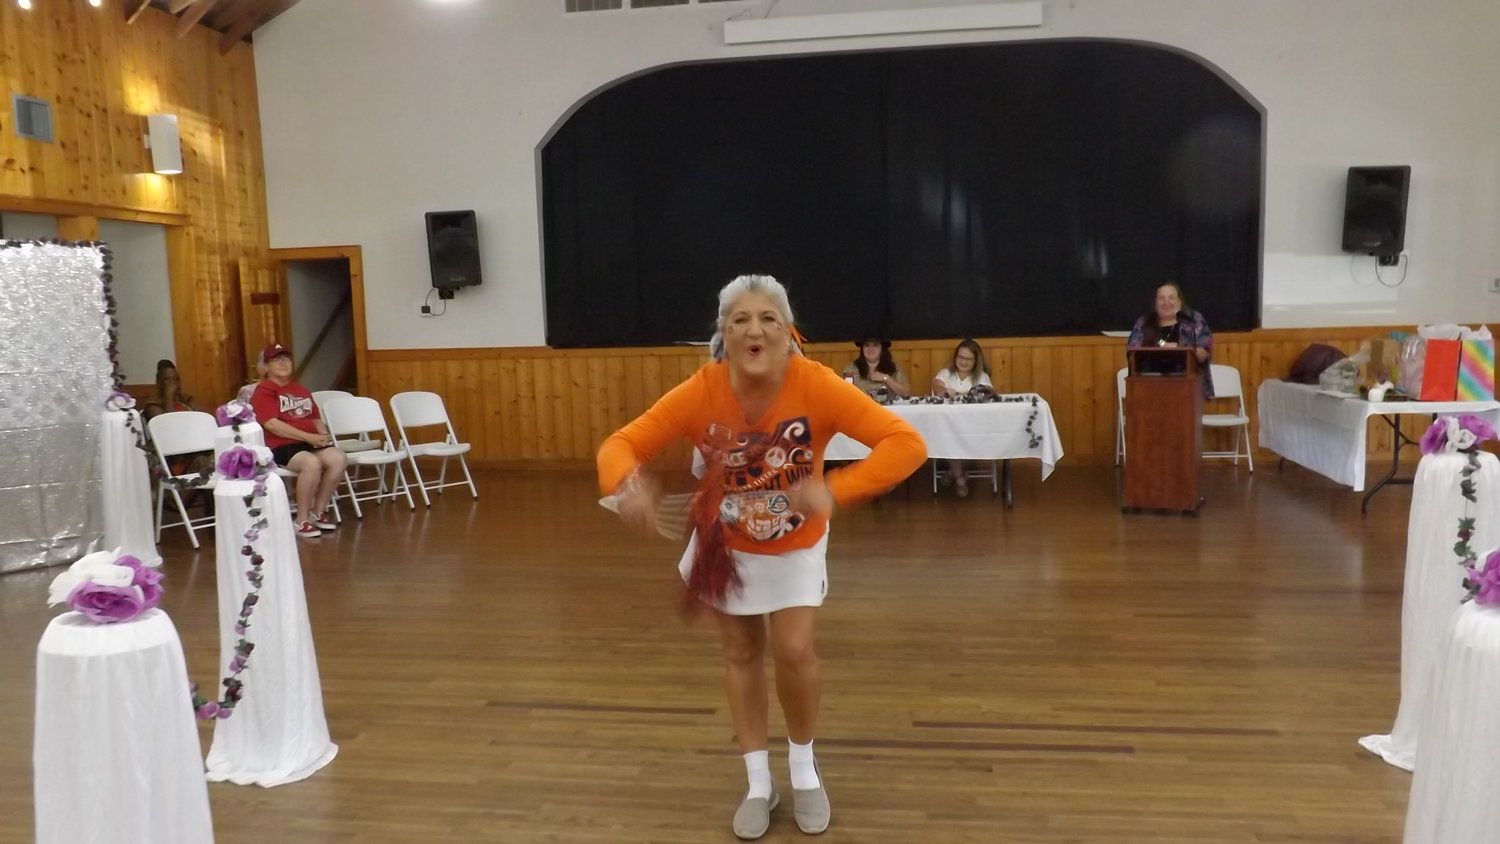 Joan Henderson showed her Auburn spirit and won first place in the sports category.